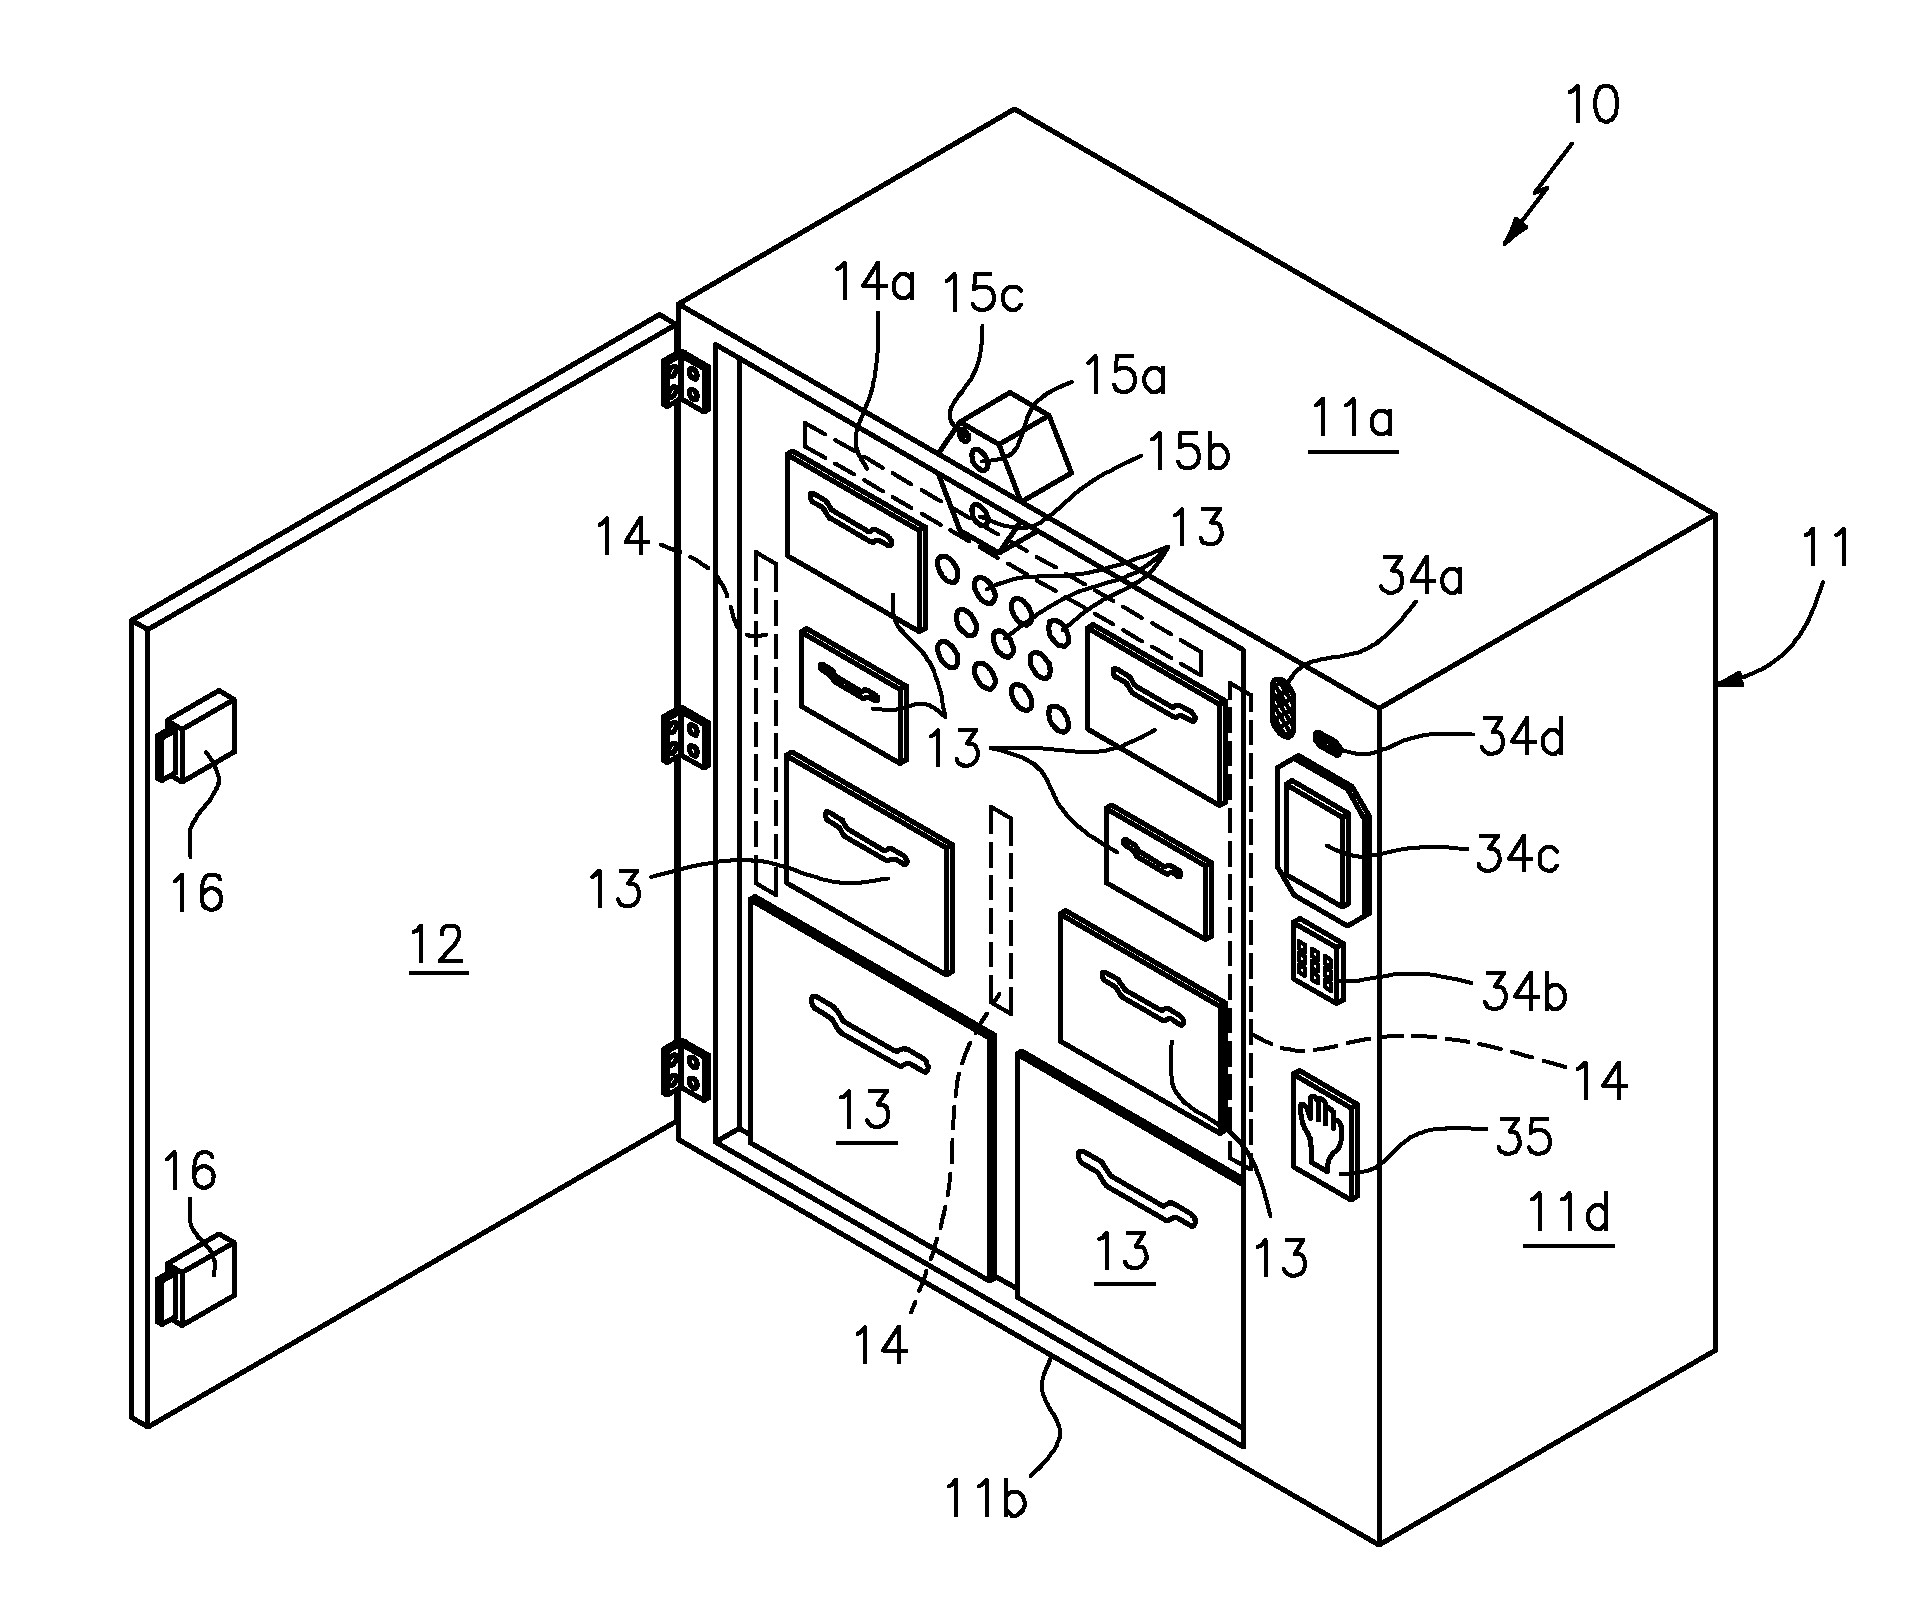 Access controlled medication storage and inventory control apparatus